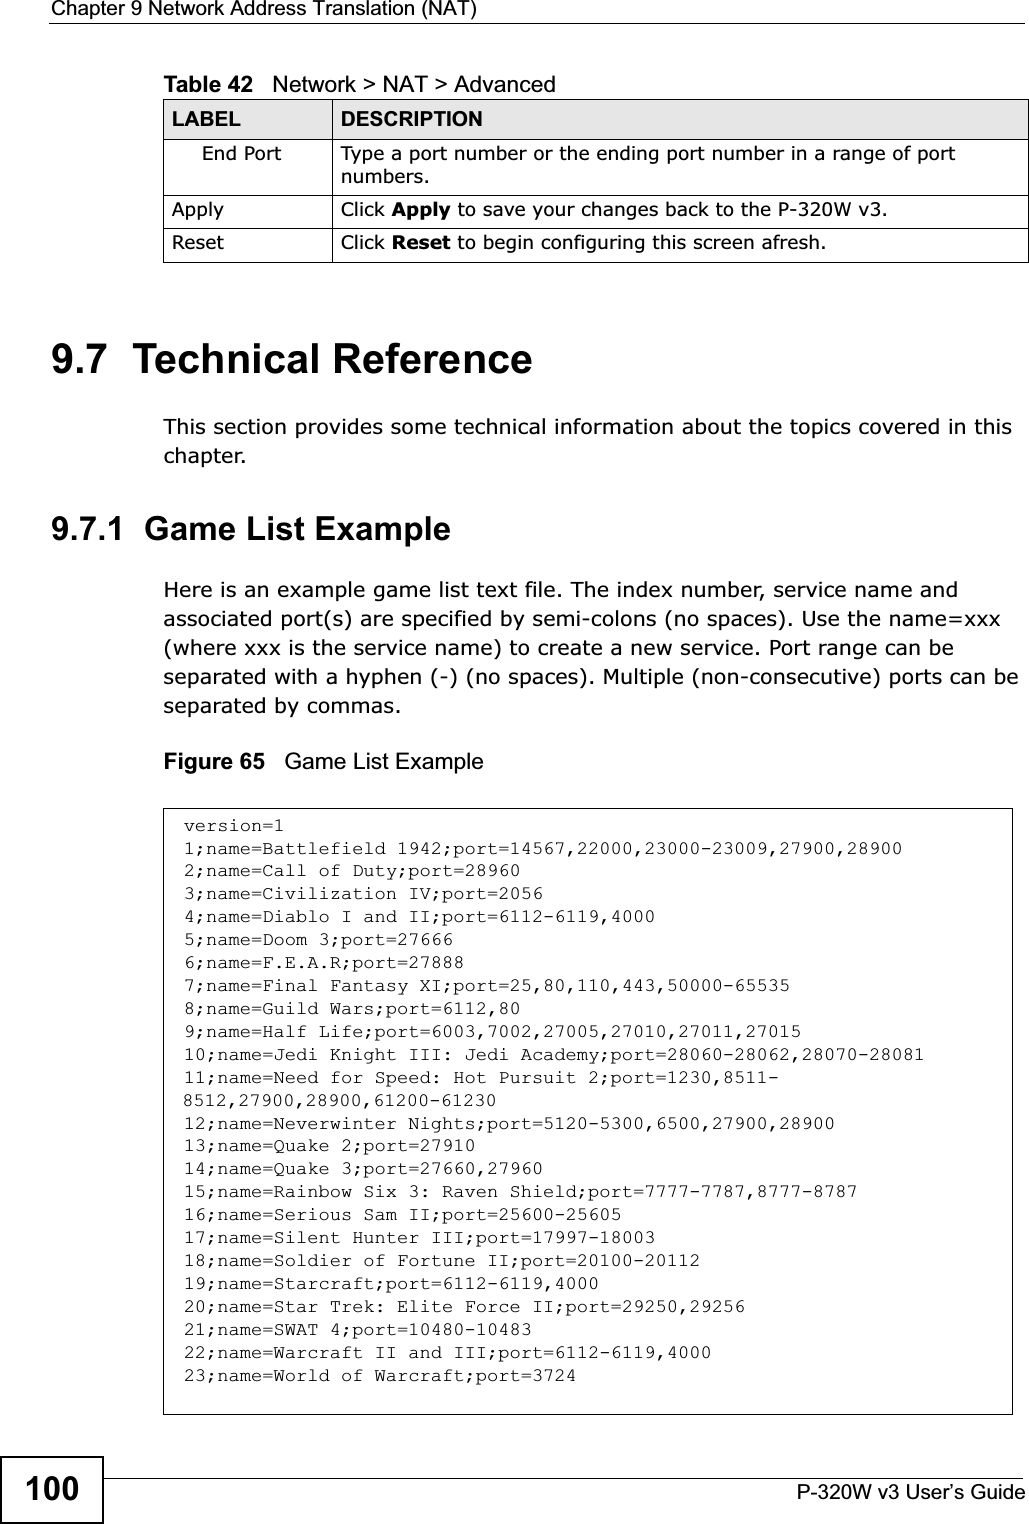 Chapter 9 Network Address Translation (NAT)P-320W v3 User’s Guide1009.7  Technical ReferenceThis section provides some technical information about the topics covered in this chapter.9.7.1  Game List ExampleHere is an example game list text file. The index number, service name and associated port(s) are specified by semi-colons (no spaces). Use the name=xxx (where xxx is the service name) to create a new service. Port range can be separated with a hyphen (-) (no spaces). Multiple (non-consecutive) ports can be separated by commas.Figure 65   Game List ExampleEnd Port Type a port number or the ending port number in a range of port numbers.Apply Click Apply to save your changes back to the P-320W v3.Reset Click Reset to begin configuring this screen afresh.Table 42   Network &gt; NAT &gt; AdvancedLABEL DESCRIPTIONversion=11;name=Battlefield 1942;port=14567,22000,23000-23009,27900,289002;name=Call of Duty;port=289603;name=Civilization IV;port=20564;name=Diablo I and II;port=6112-6119,40005;name=Doom 3;port=276666;name=F.E.A.R;port=278887;name=Final Fantasy XI;port=25,80,110,443,50000-655358;name=Guild Wars;port=6112,809;name=Half Life;port=6003,7002,27005,27010,27011,2701510;name=Jedi Knight III: Jedi Academy;port=28060-28062,28070-2808111;name=Need for Speed: Hot Pursuit 2;port=1230,8511-8512,27900,28900,61200-6123012;name=Neverwinter Nights;port=5120-5300,6500,27900,2890013;name=Quake 2;port=2791014;name=Quake 3;port=27660,2796015;name=Rainbow Six 3: Raven Shield;port=7777-7787,8777-878716;name=Serious Sam II;port=25600-2560517;name=Silent Hunter III;port=17997-1800318;name=Soldier of Fortune II;port=20100-2011219;name=Starcraft;port=6112-6119,400020;name=Star Trek: Elite Force II;port=29250,2925621;name=SWAT 4;port=10480-1048322;name=Warcraft II and III;port=6112-6119,400023;name=World of Warcraft;port=3724